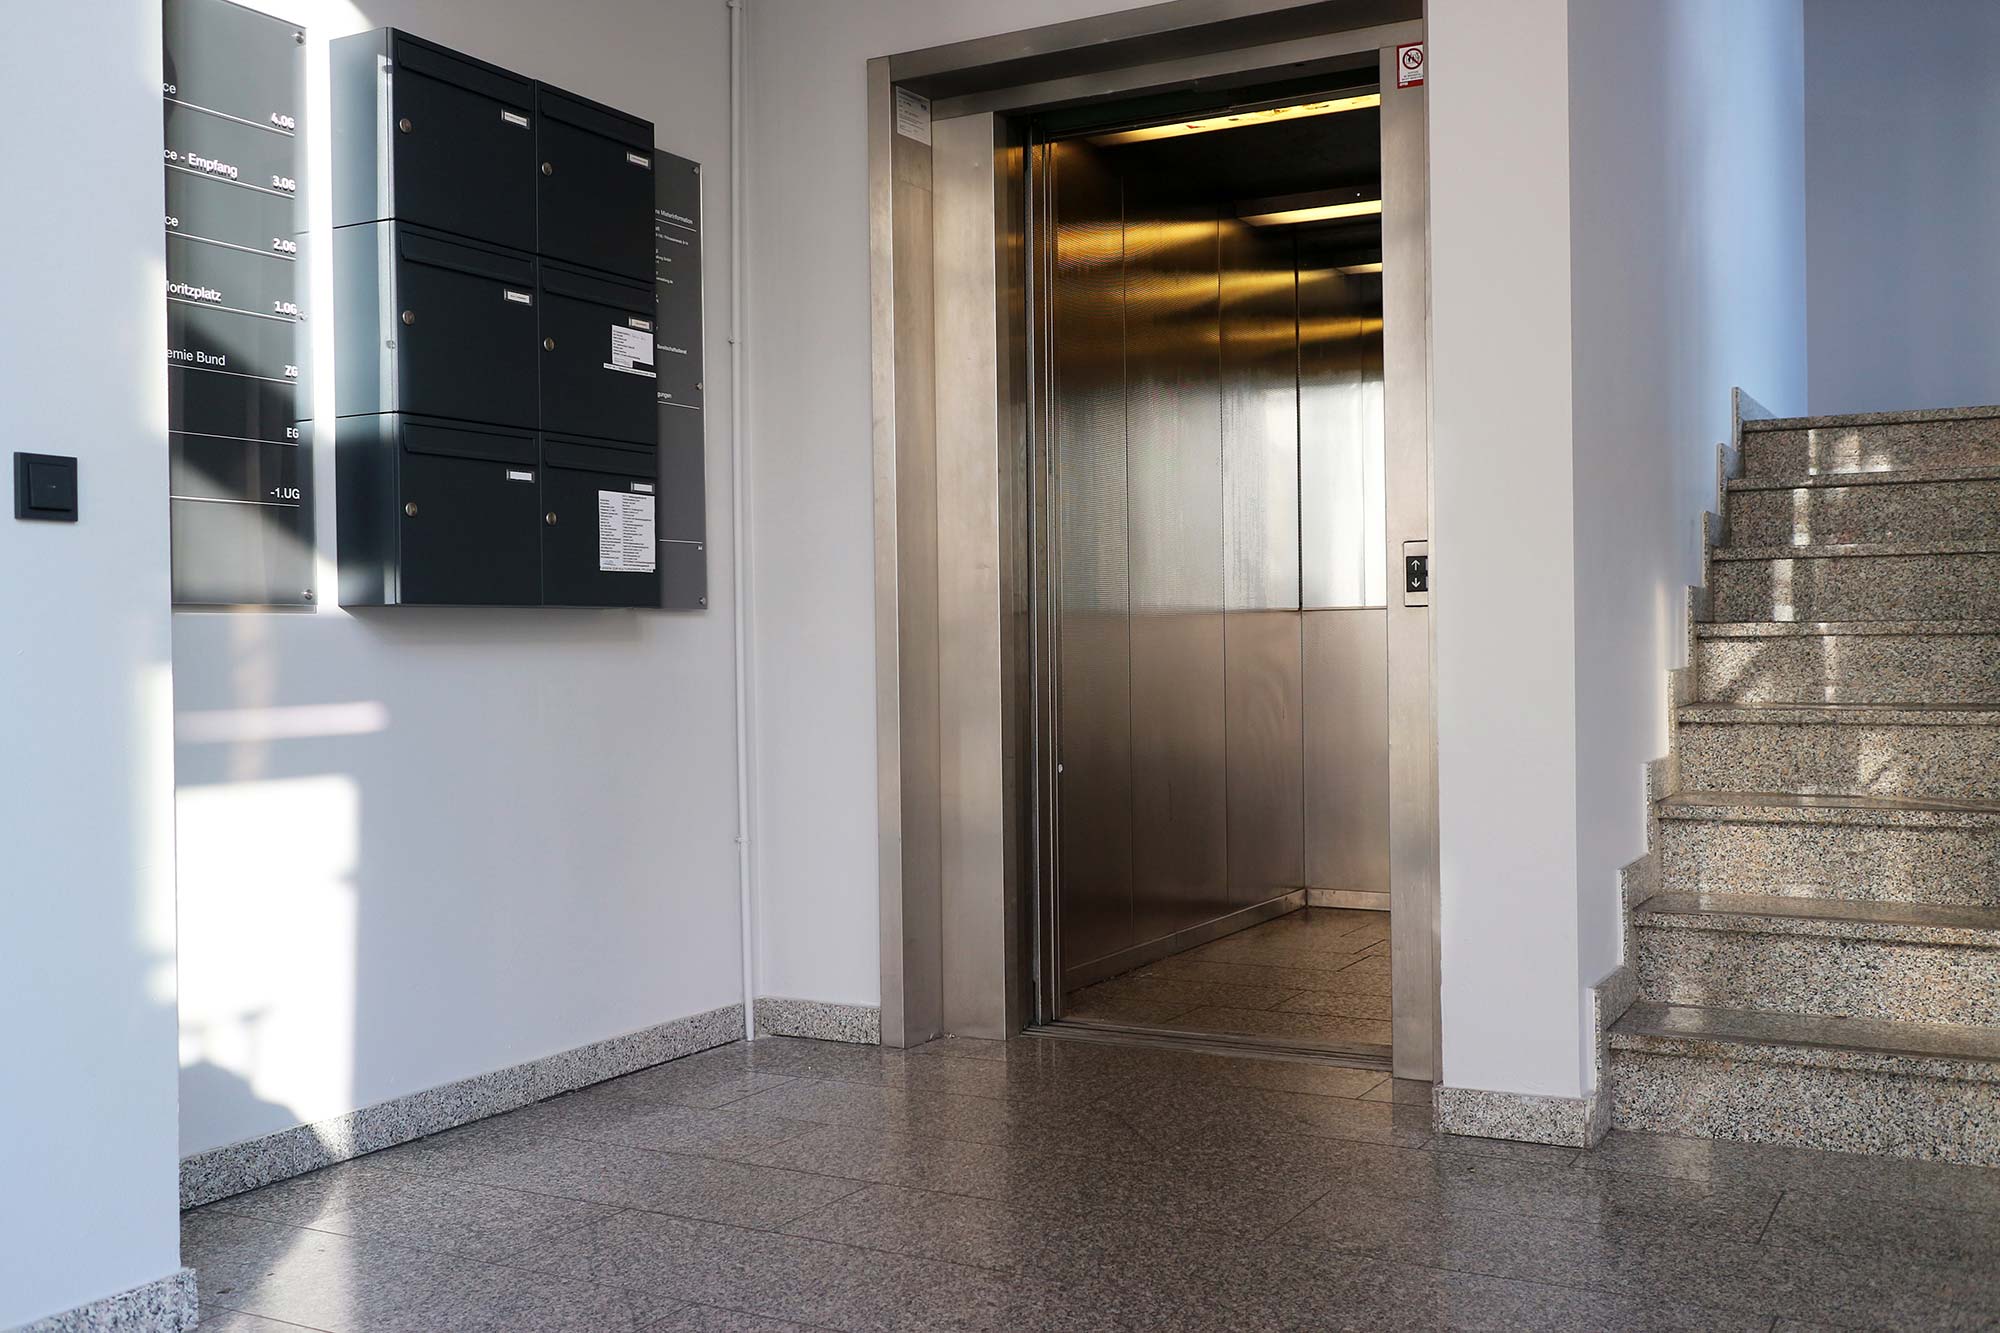 The entrance area of the office building has white walls and a mottled gray floor; anthracite mailboxes hang on the wall to the left; to the right, steps go up to the second floor; in the middle the elevator, whose door is open, is located; the elevator is silver